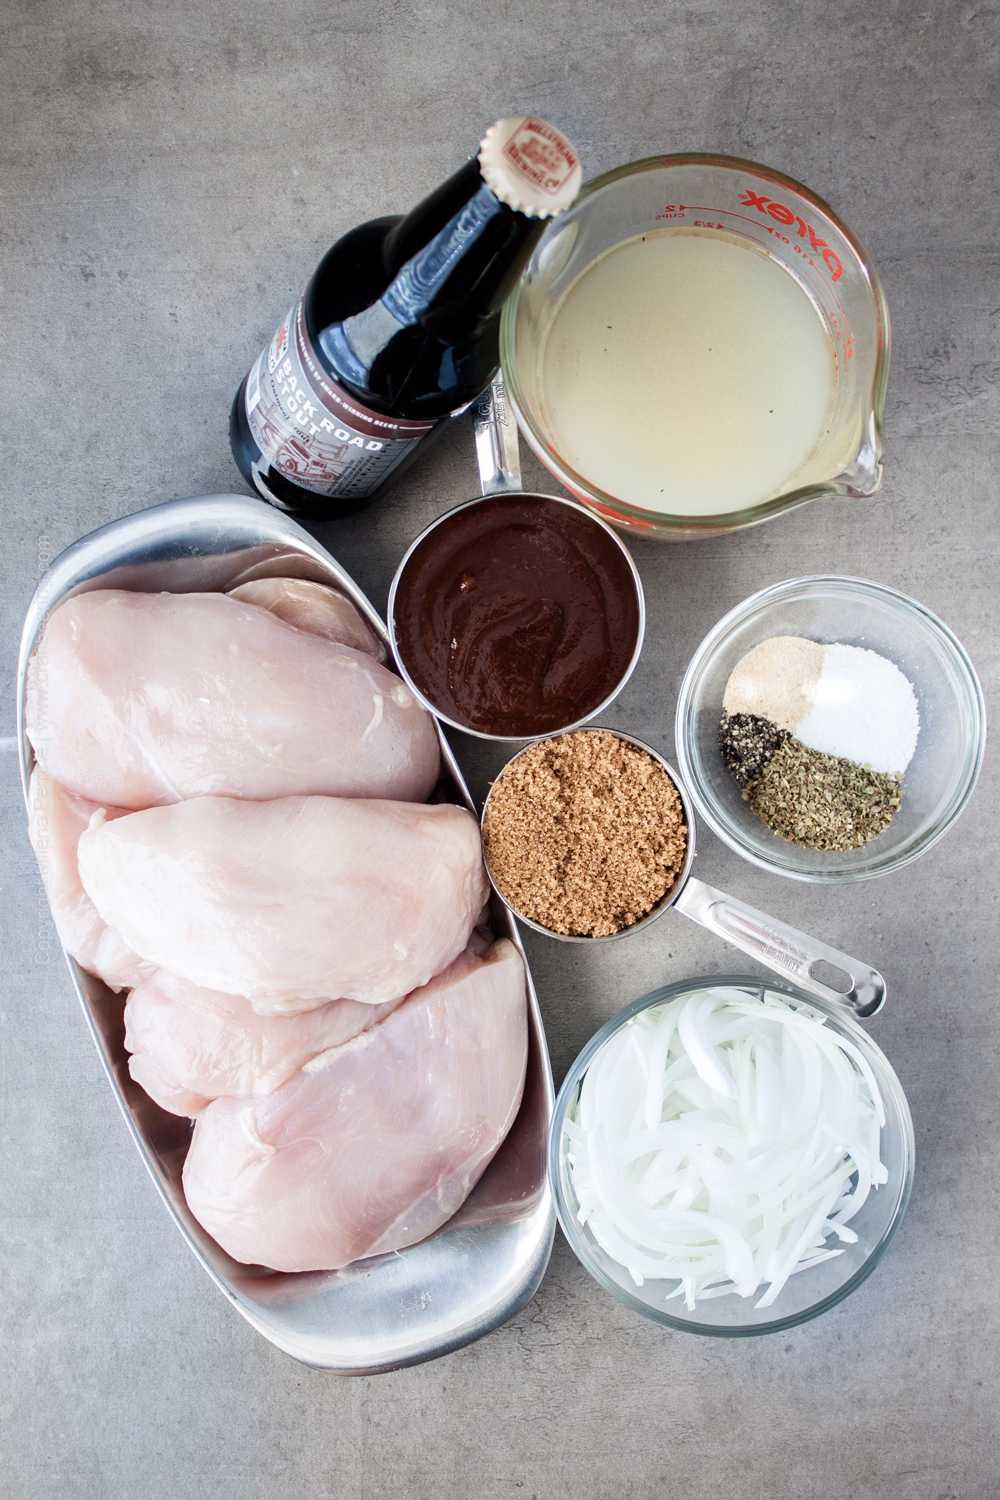 Ingredients for pulled chicken crock pot - Chicken breast, beer, barbecue sauce, brown sugar, onions, chicken stock and and seasonings